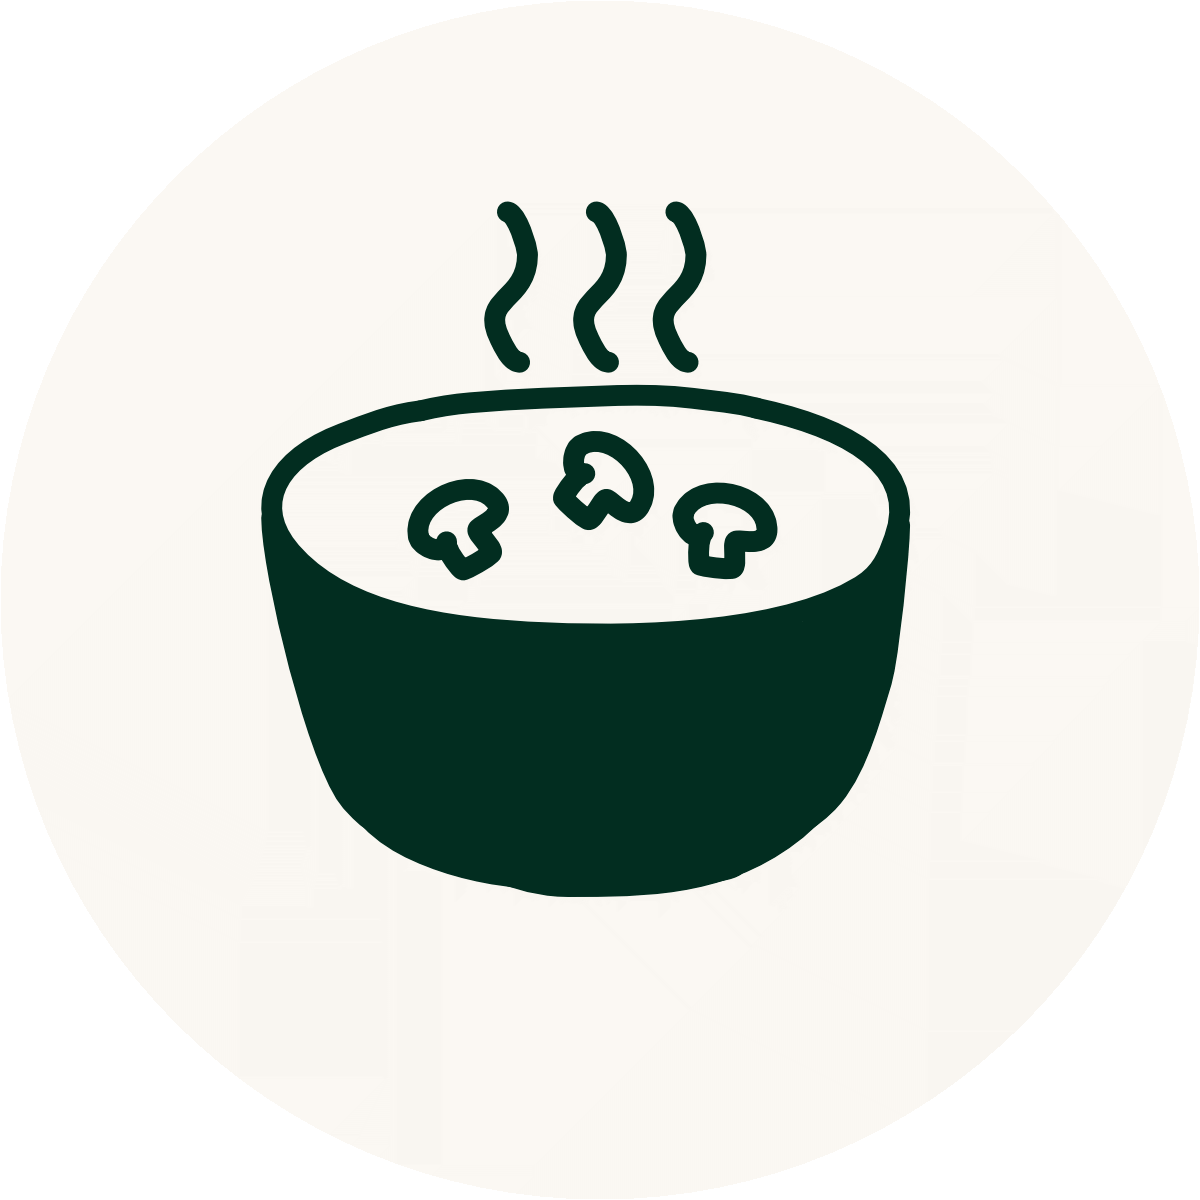 Clipart of a bowl of soup.